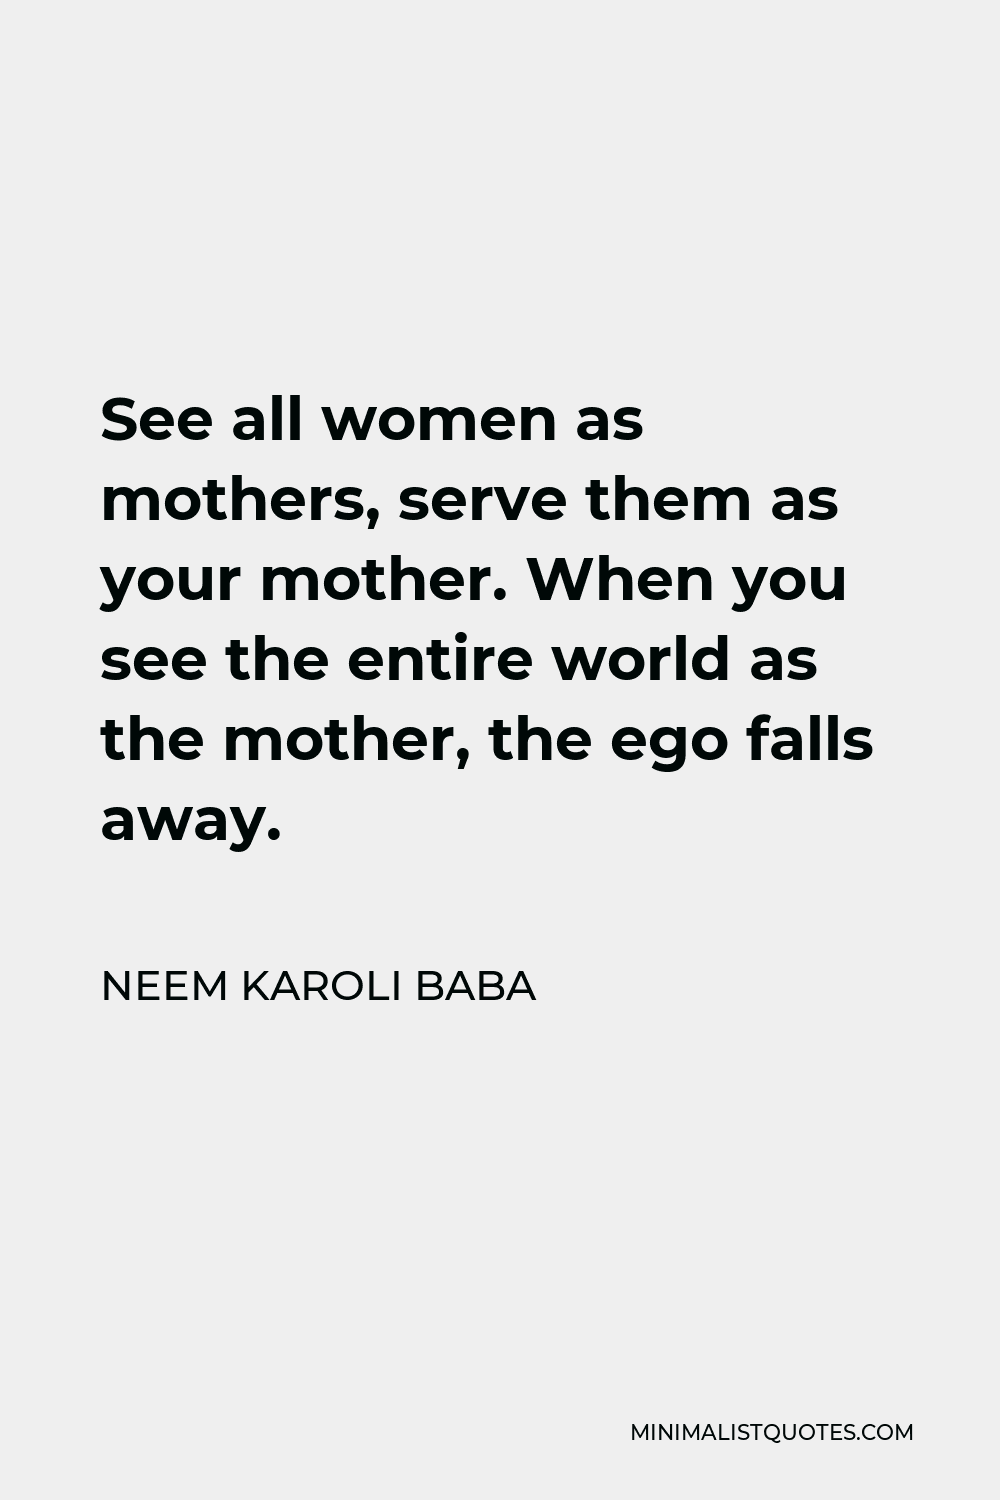 Neem Karoli Baba Quote - See all women as mothers, serve them as your mother. When you see the entire world as the mother, the ego falls away.